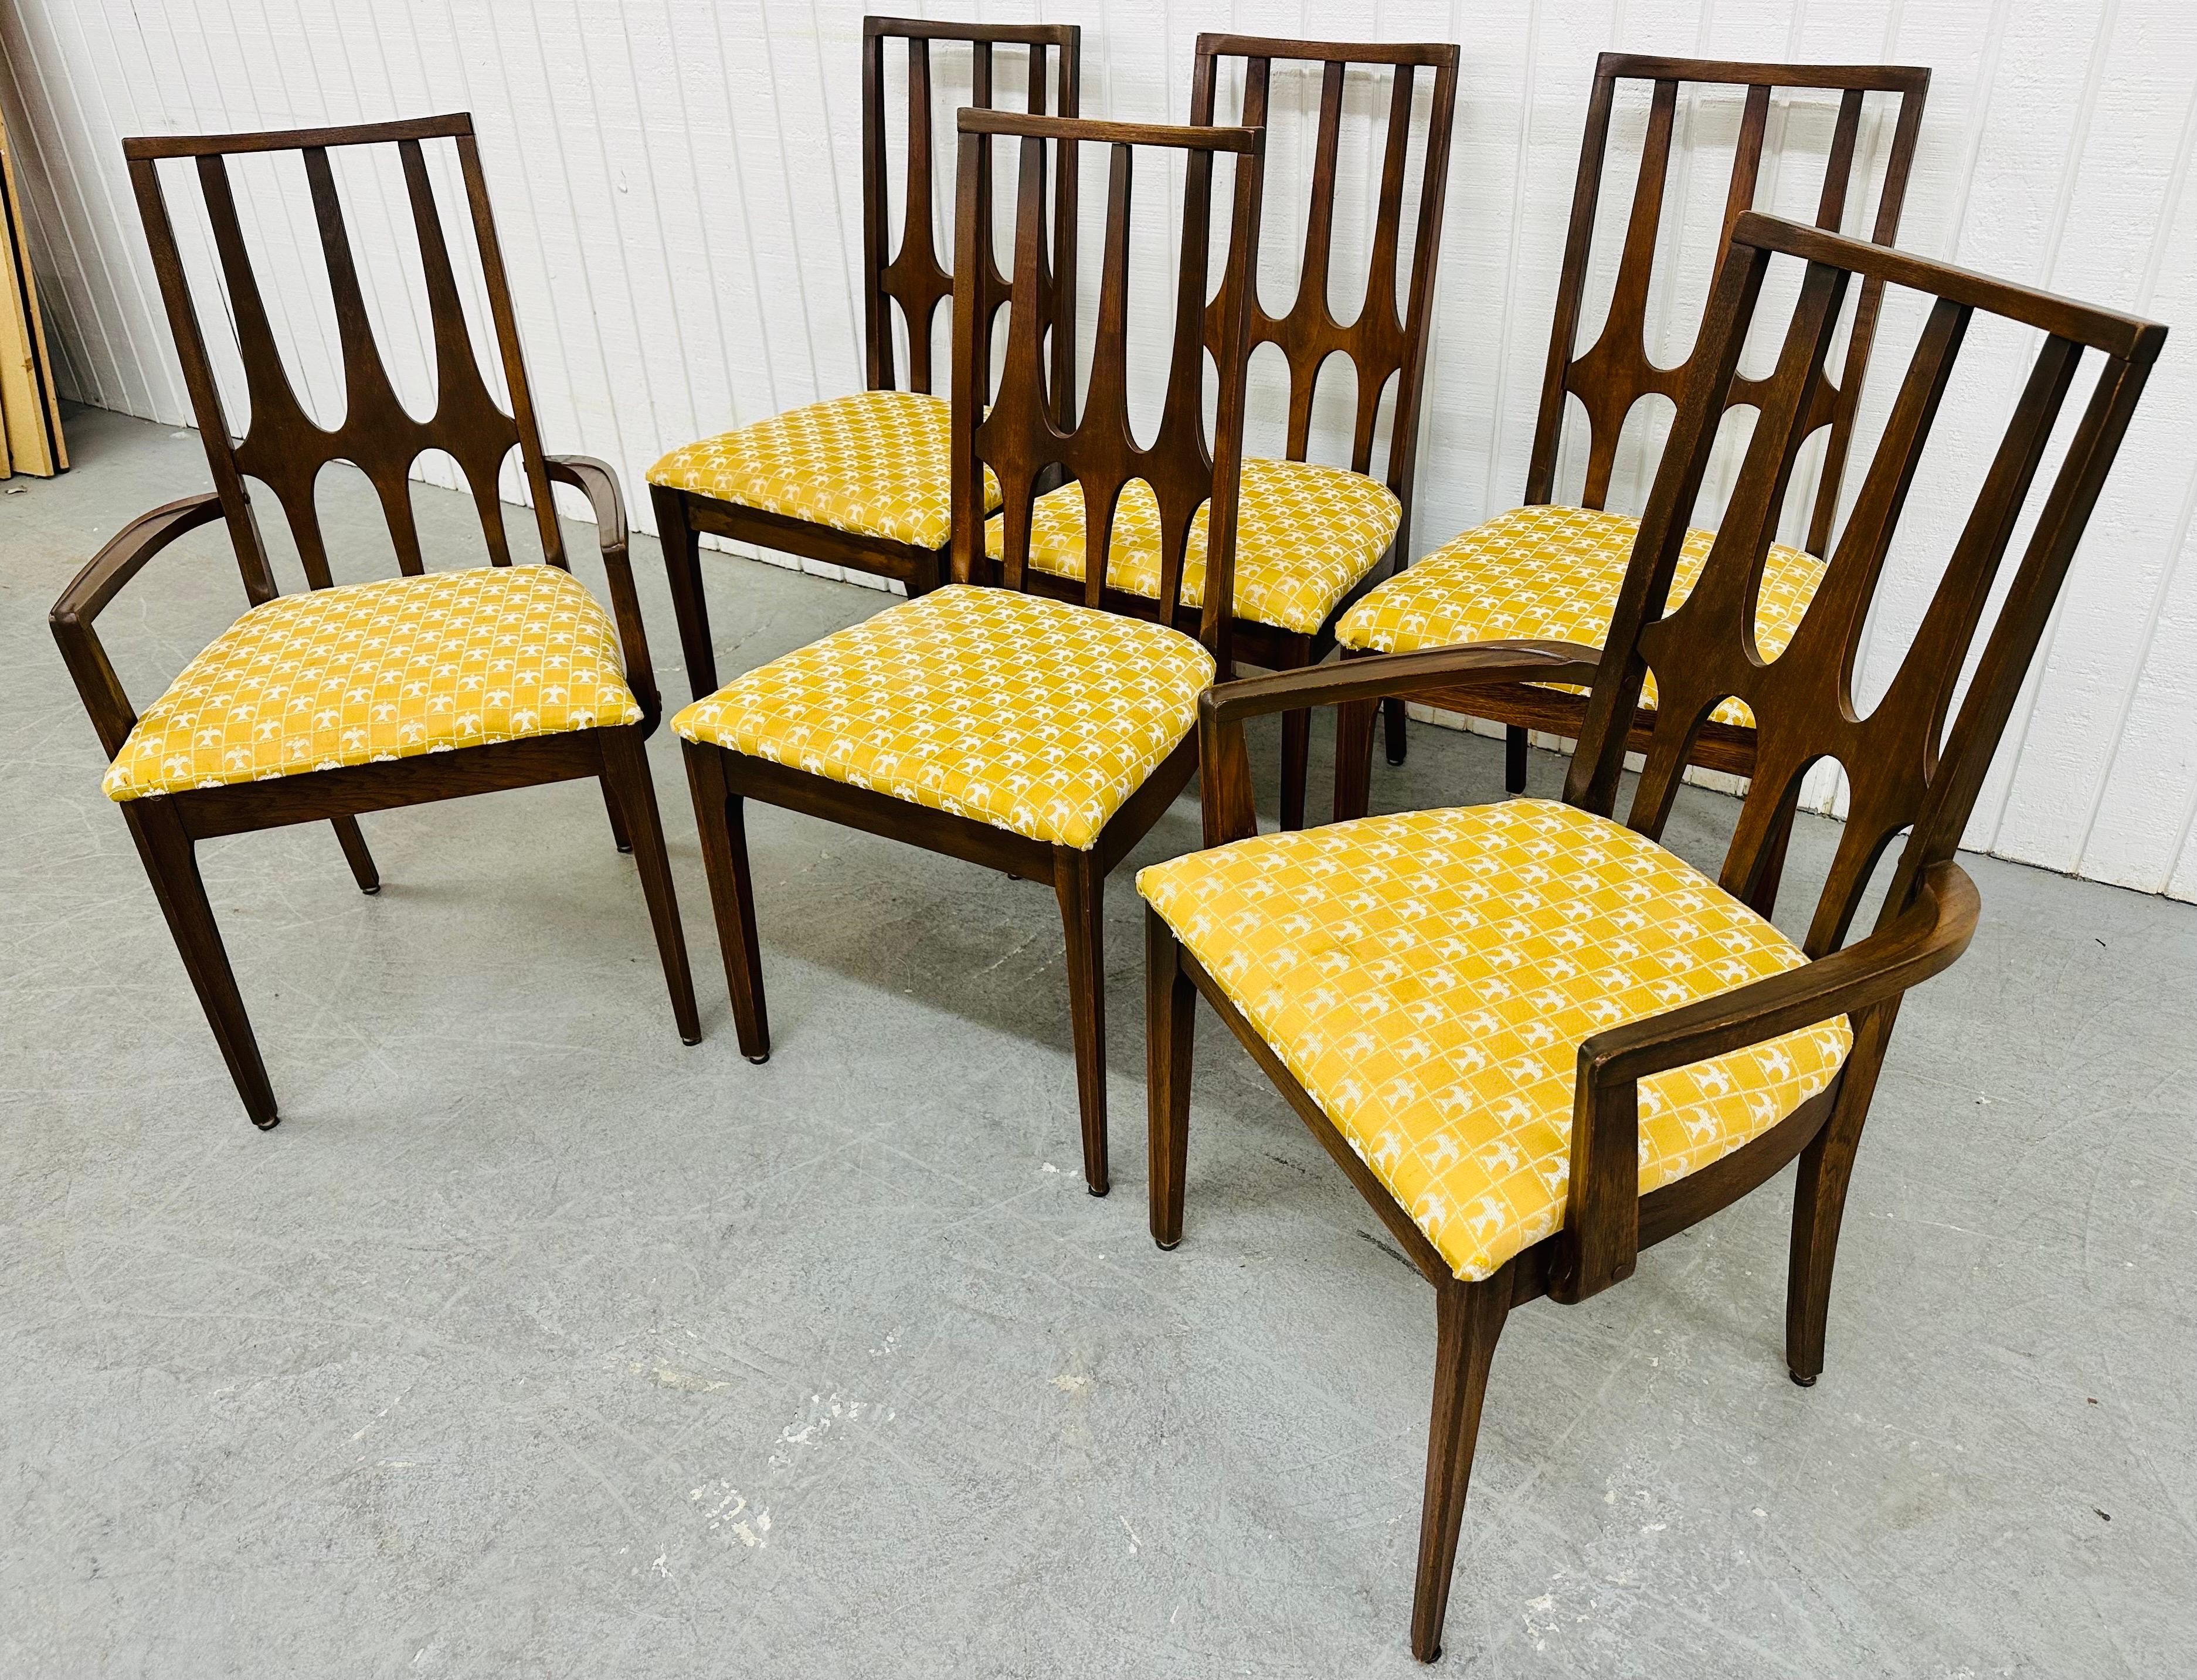 This listing is for a set of six Mid-Century Modern Broyhill Brasilia Walnut Dining Chairs. Featuring two arm chairs, four side chairs, sculpted Brasilia high back rests, modern legs, and original gold Brasilia upholstered seats. This is an